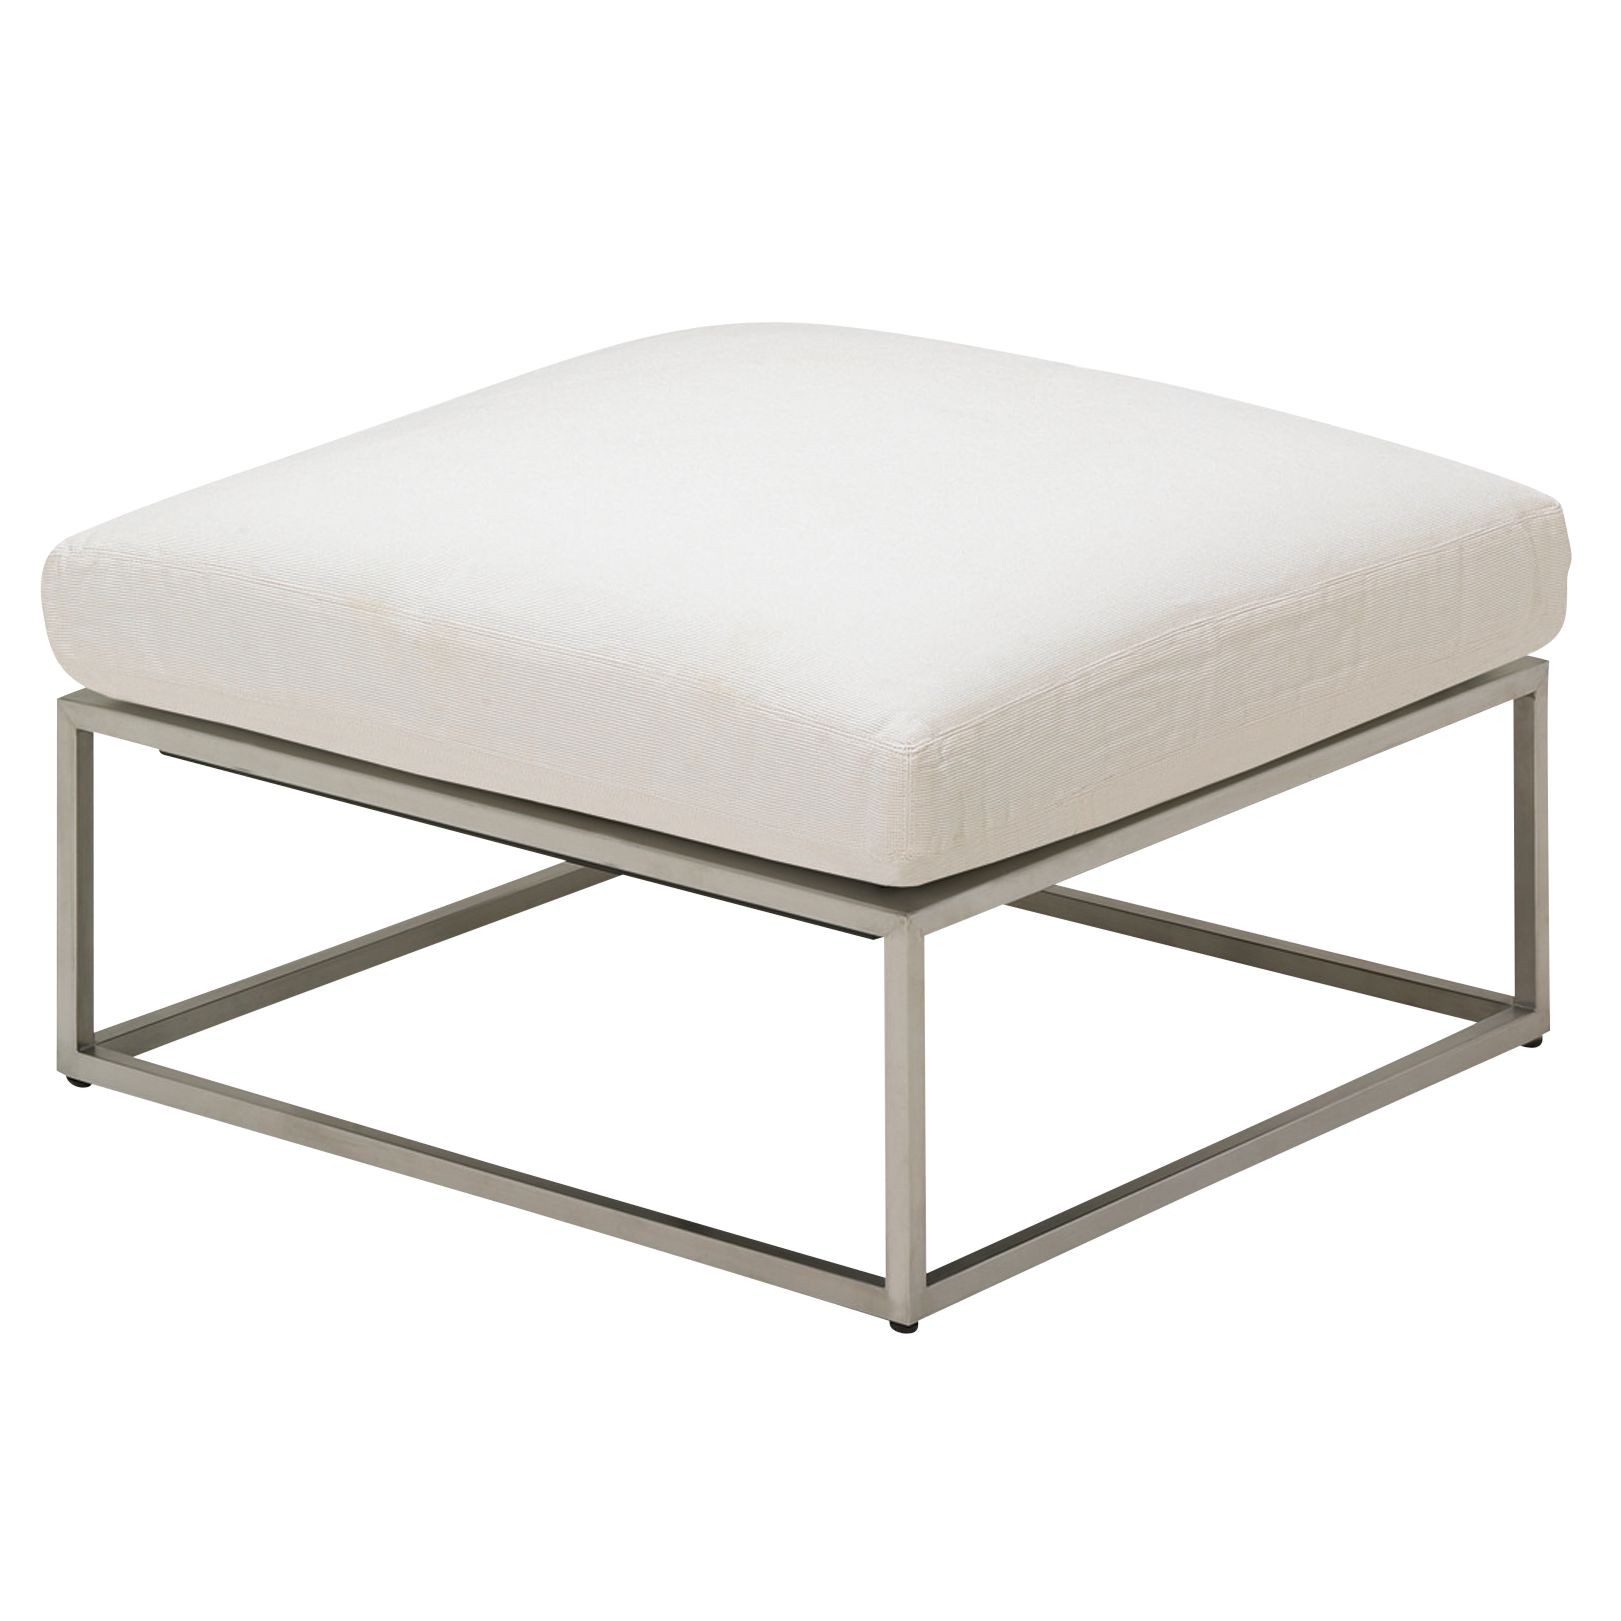 Gloster Cloud 75 x 75 Outdoor Ottomans